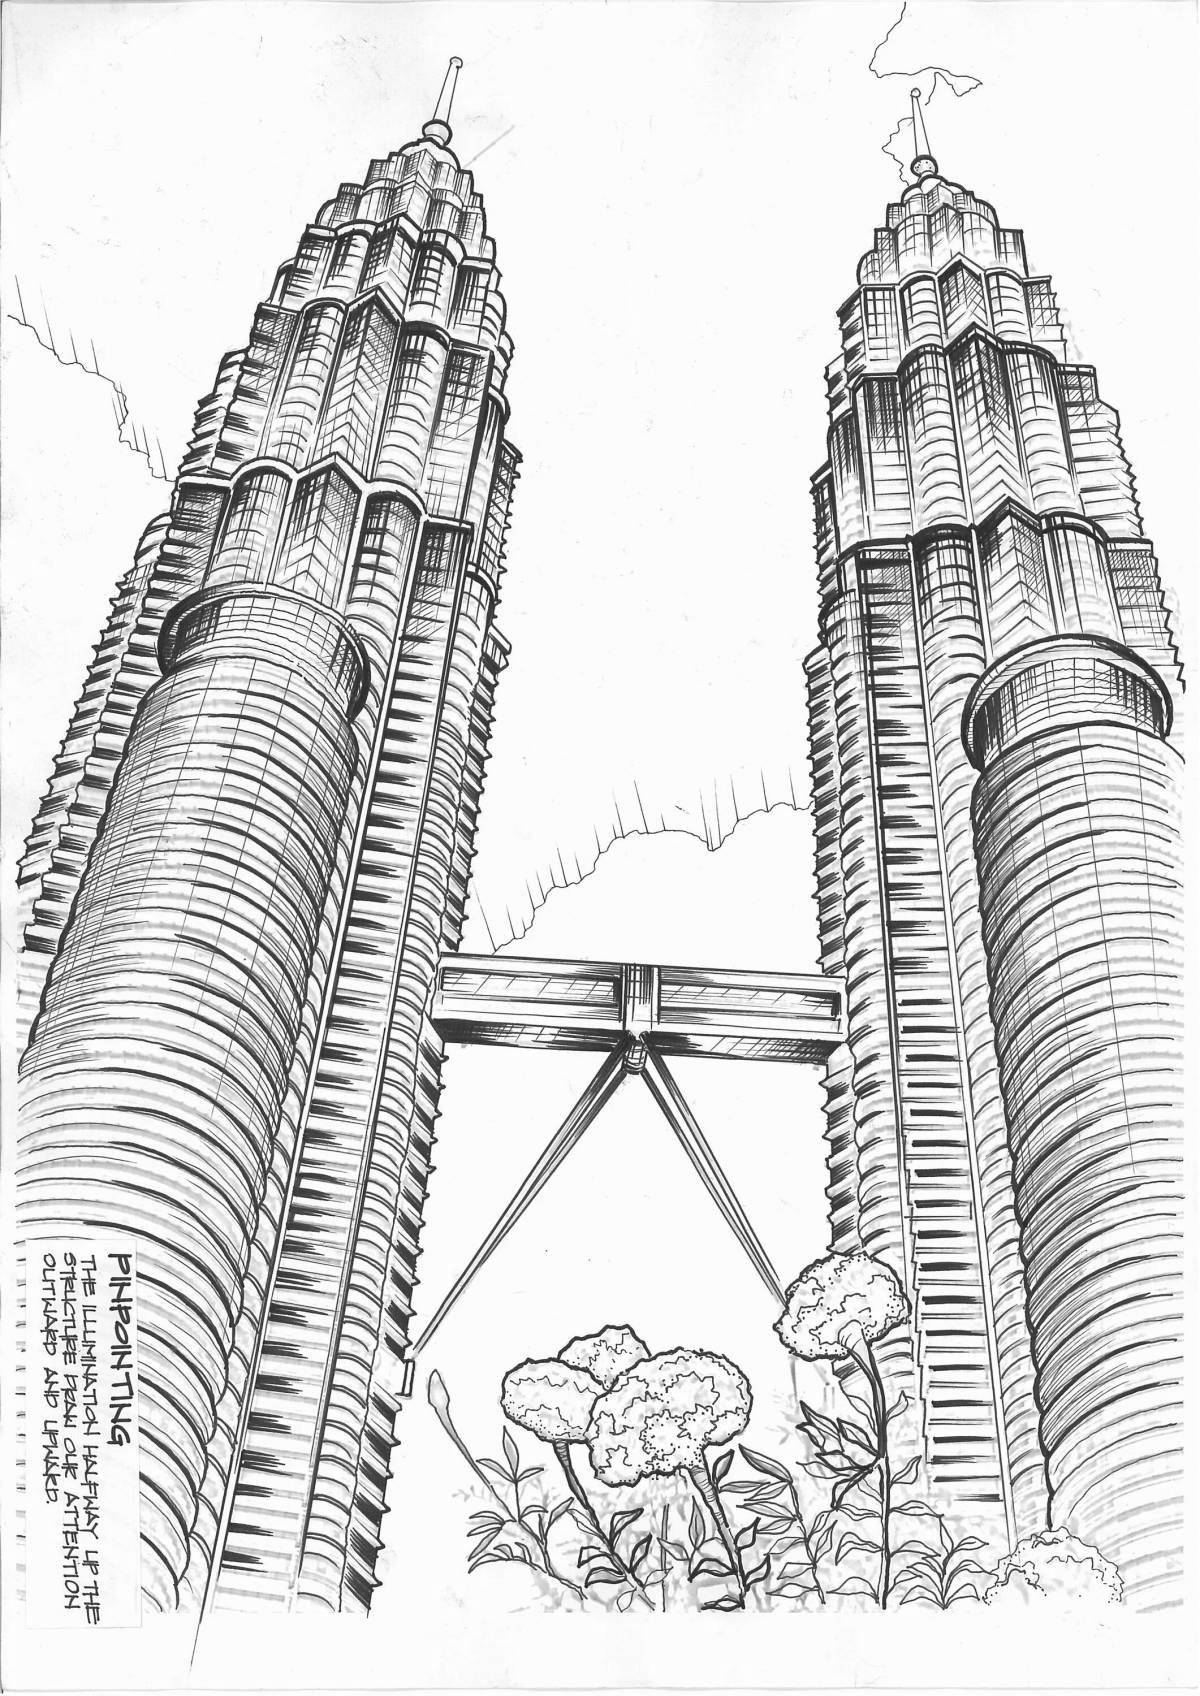 Exciting skyscraper coloring book for kids